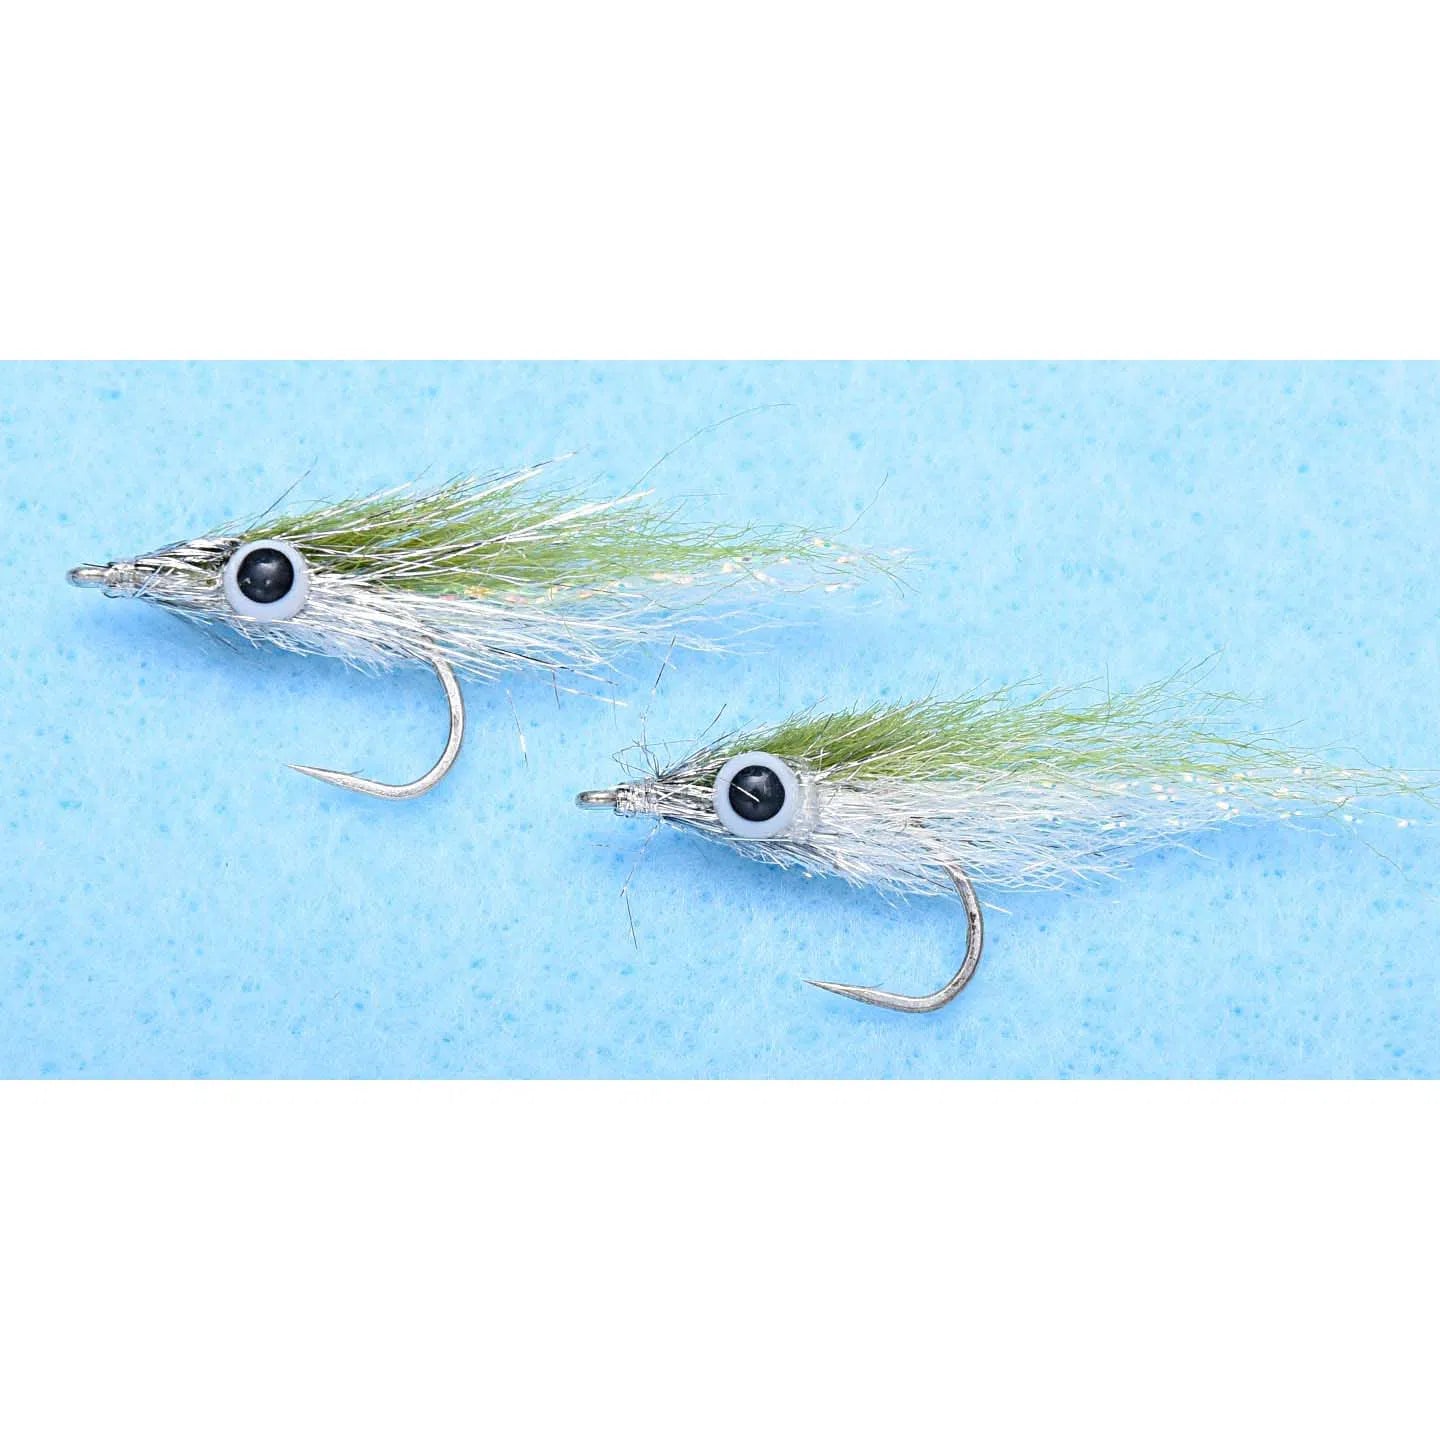 Enrico Puglisi Micro Minnow Fly-Lure - Saltwater Fly-Enrico Puglisi-Light Olive-Size #2-Fishing Station